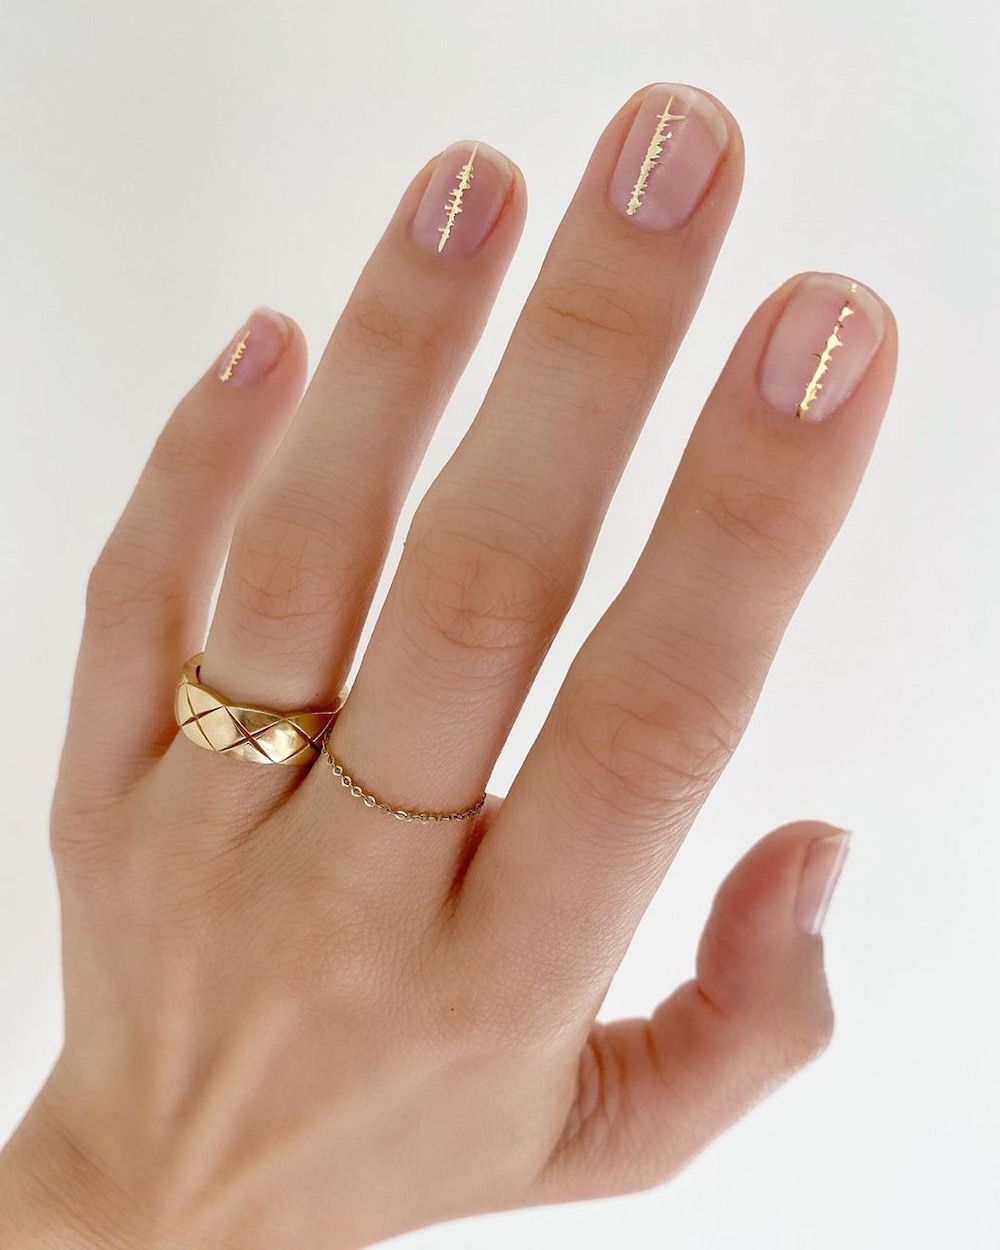 Update: 18 Holiday Nail Art Ideas Without a Single Santa in Sight  #4